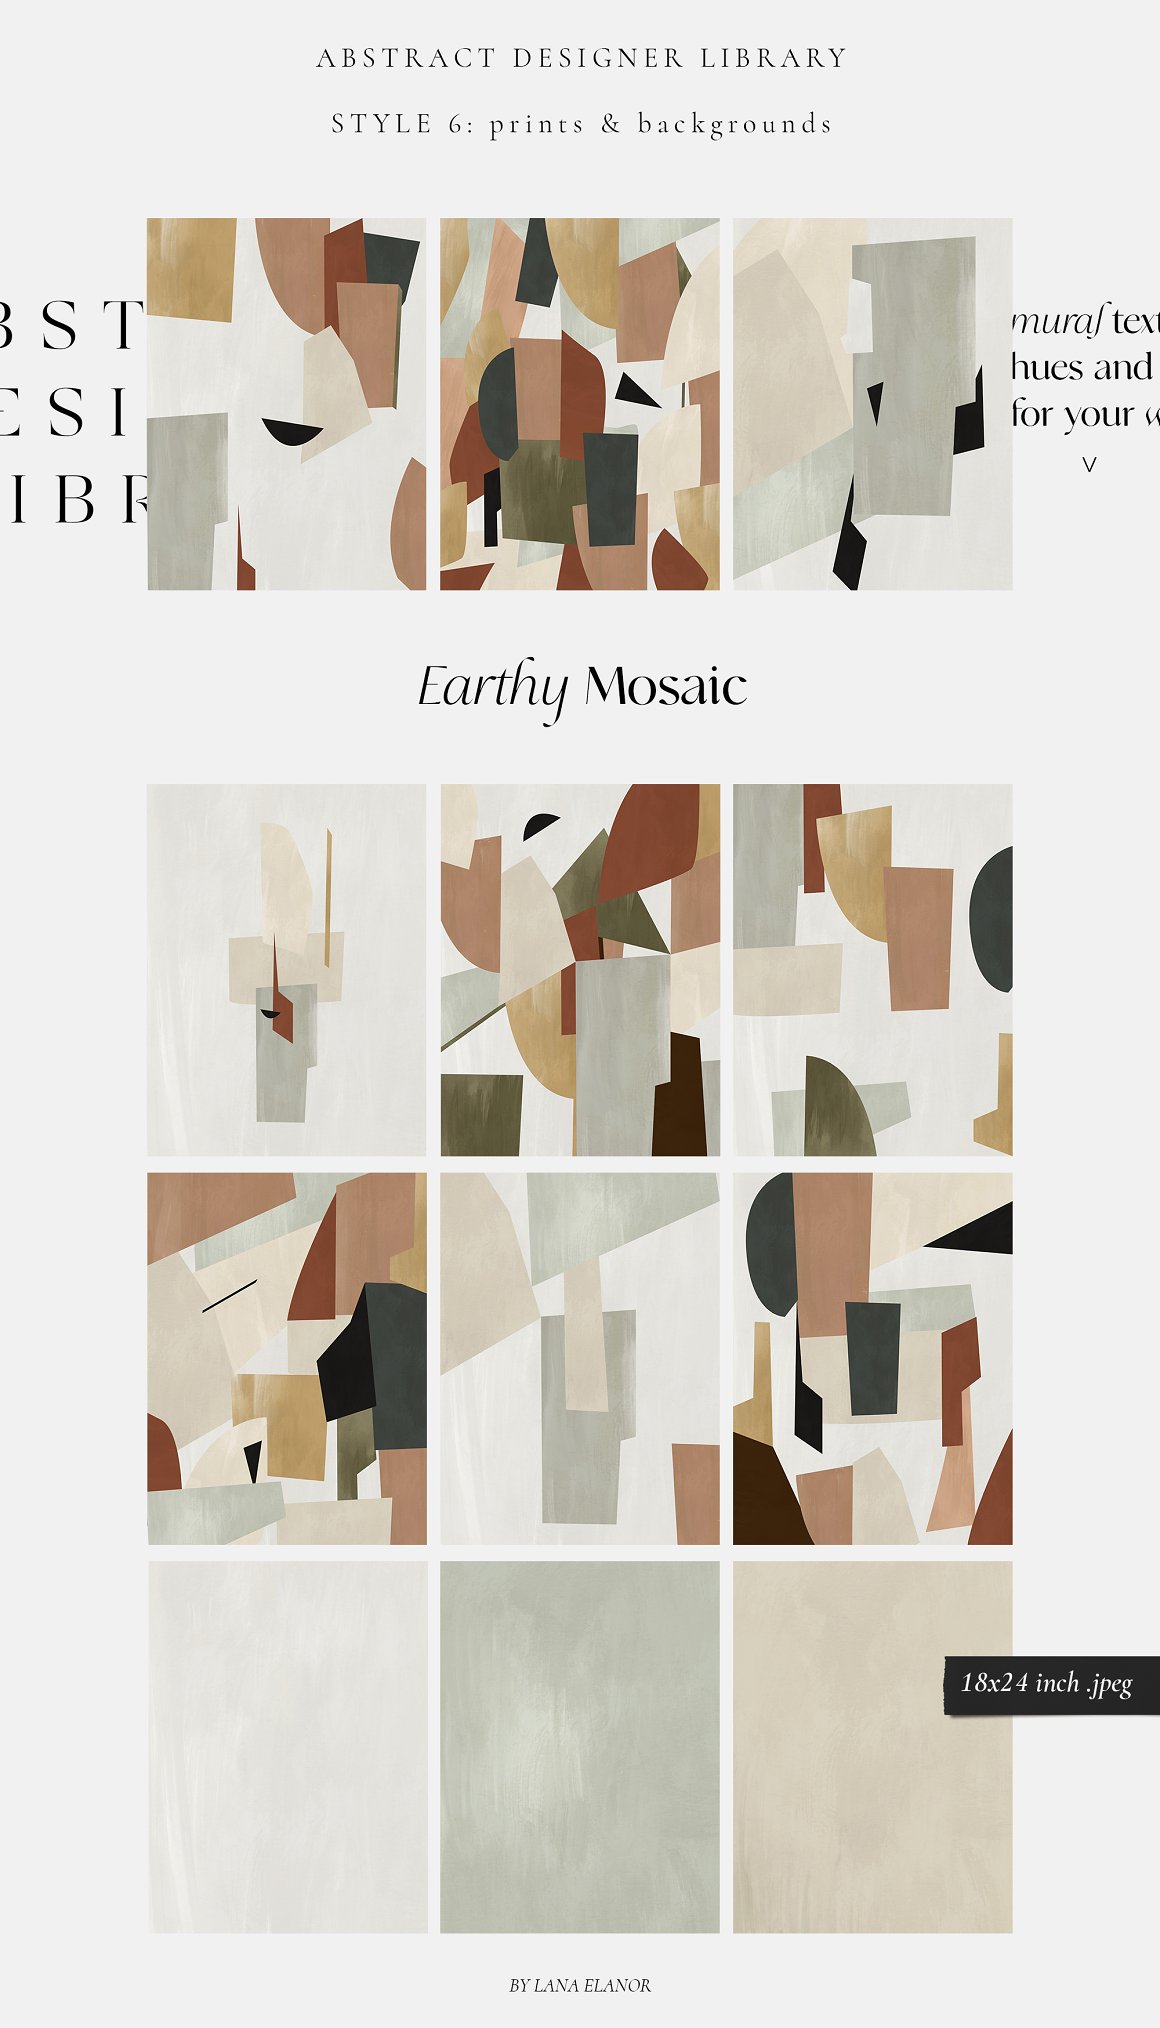 Earthy mosaic library on a gray background.